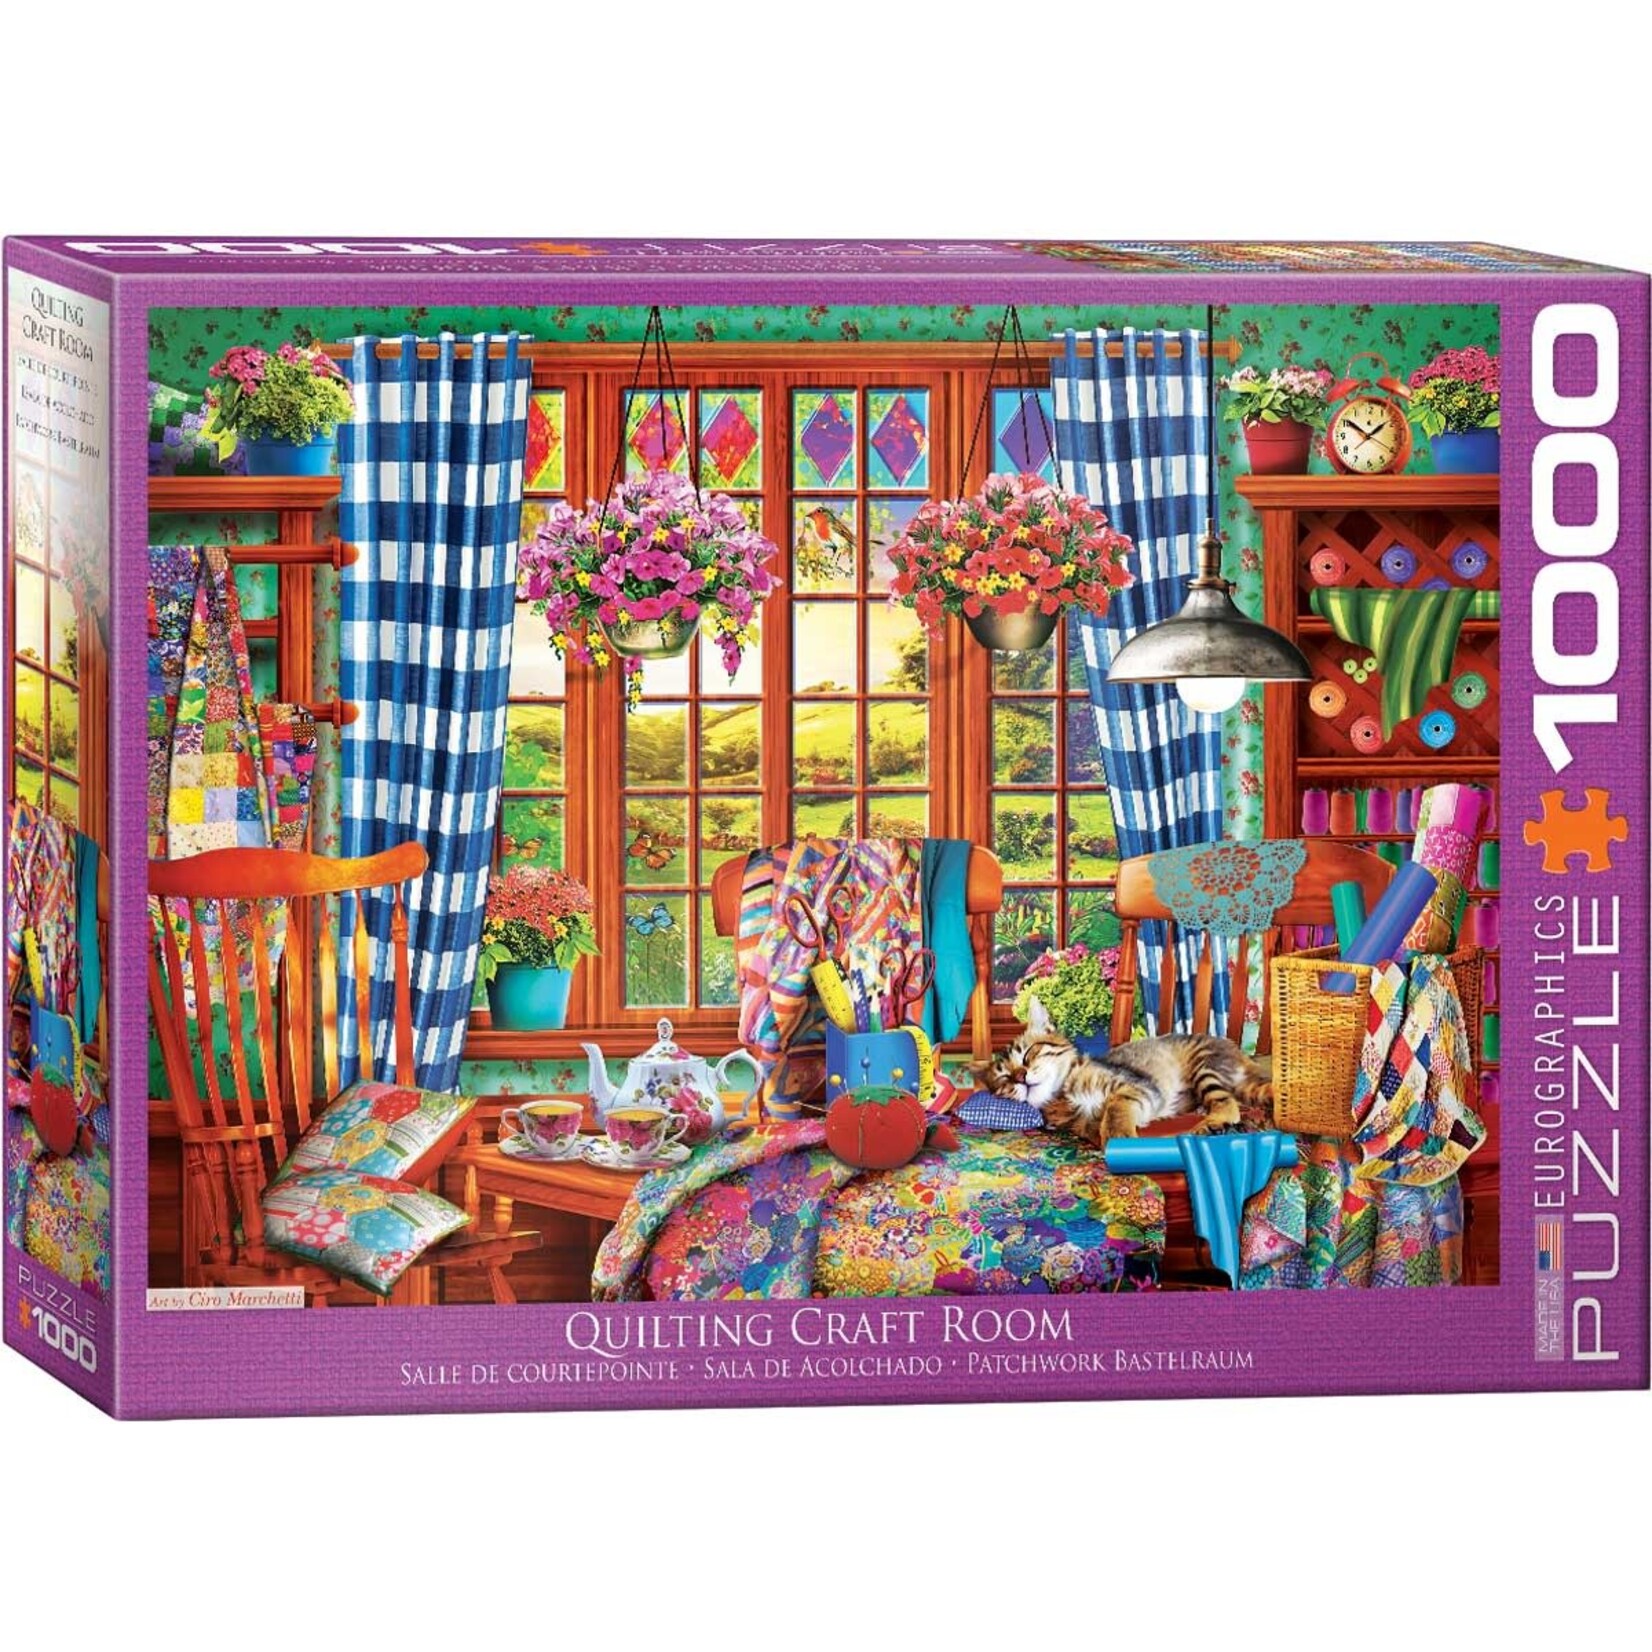 EuroGraphics Quilting Craft Room 1000pc WYW